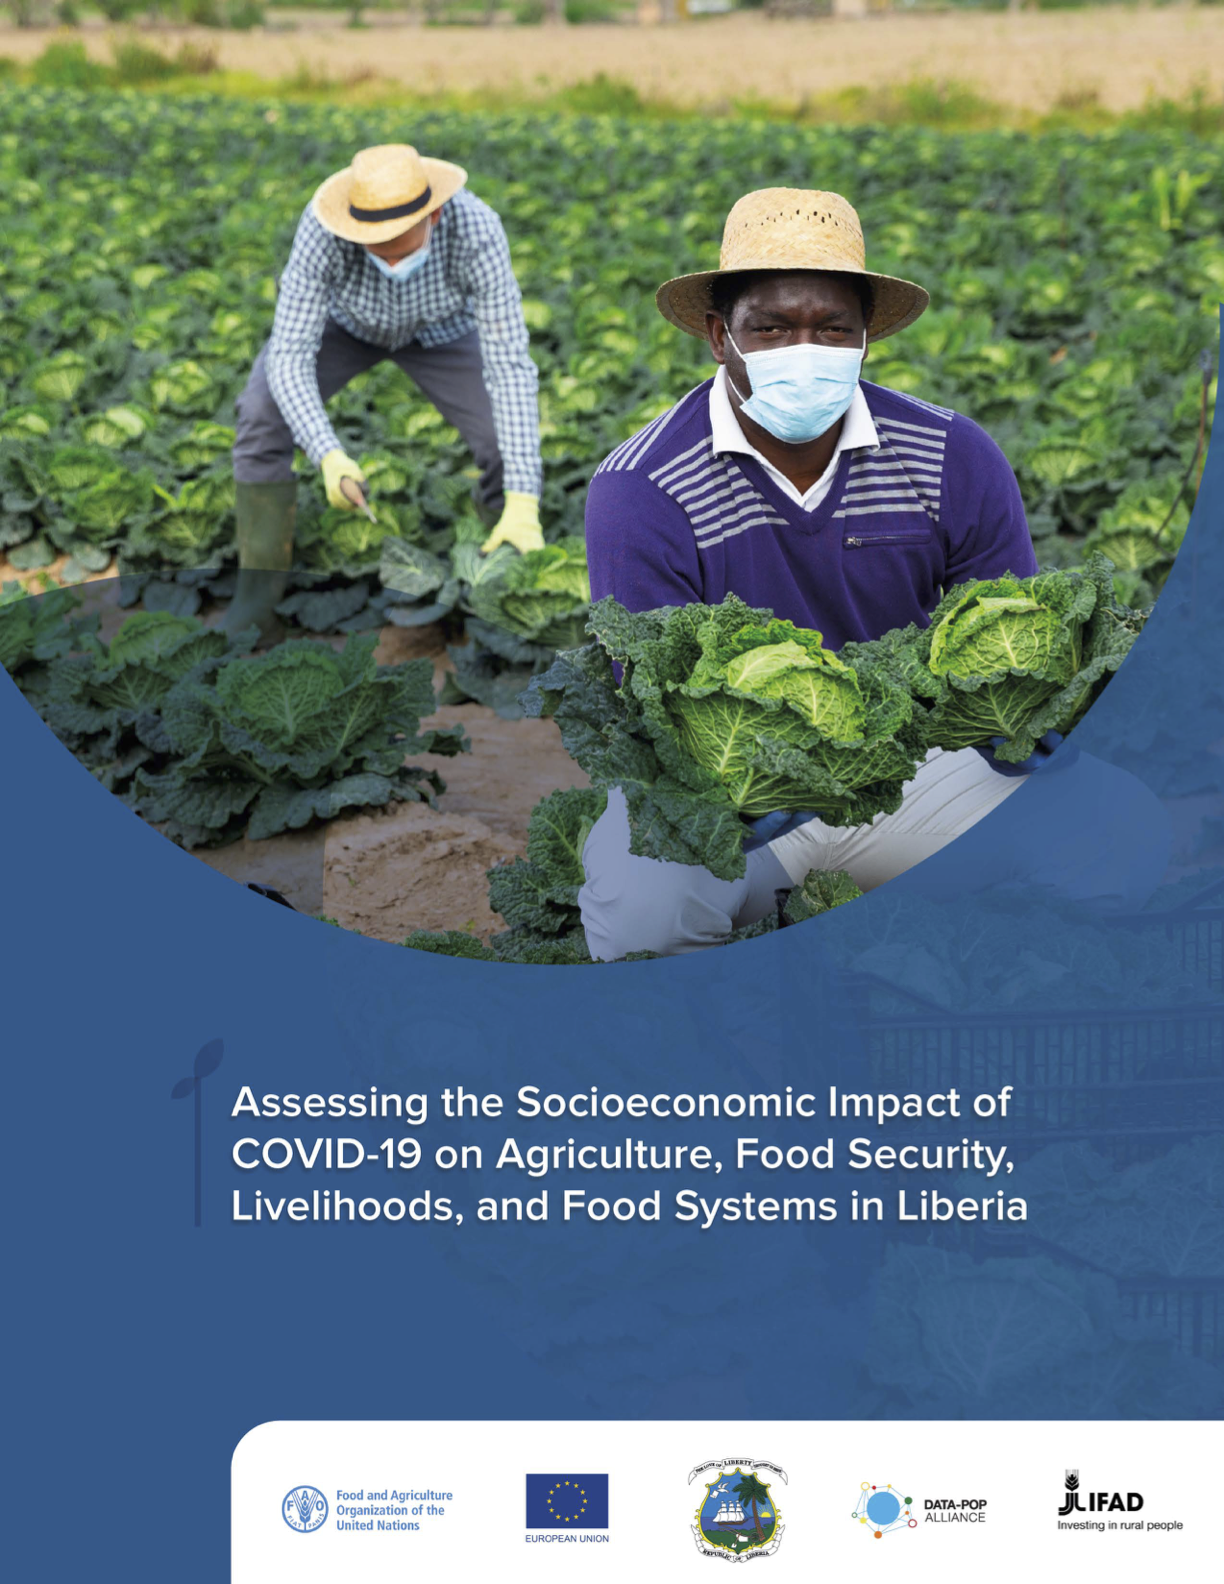 Assessing the Socioeconomic Impact of COVID-19 on Agriculture, Food Security, Livelihood and Food Systems in Liberia